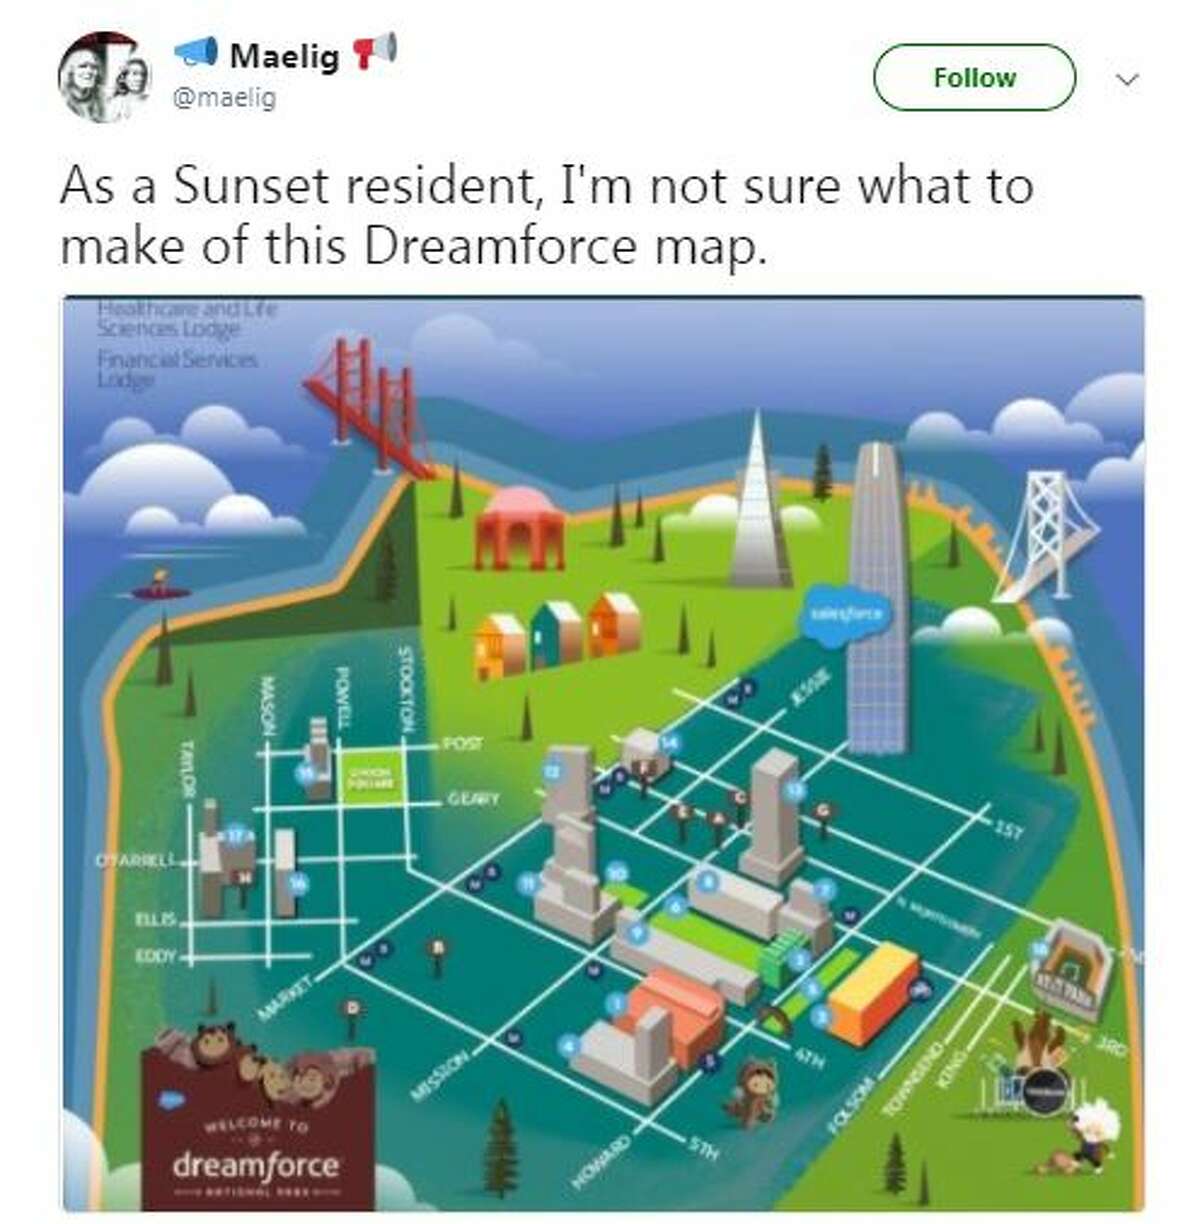 Twitter users poke fun at Dreamforce map of SF after several